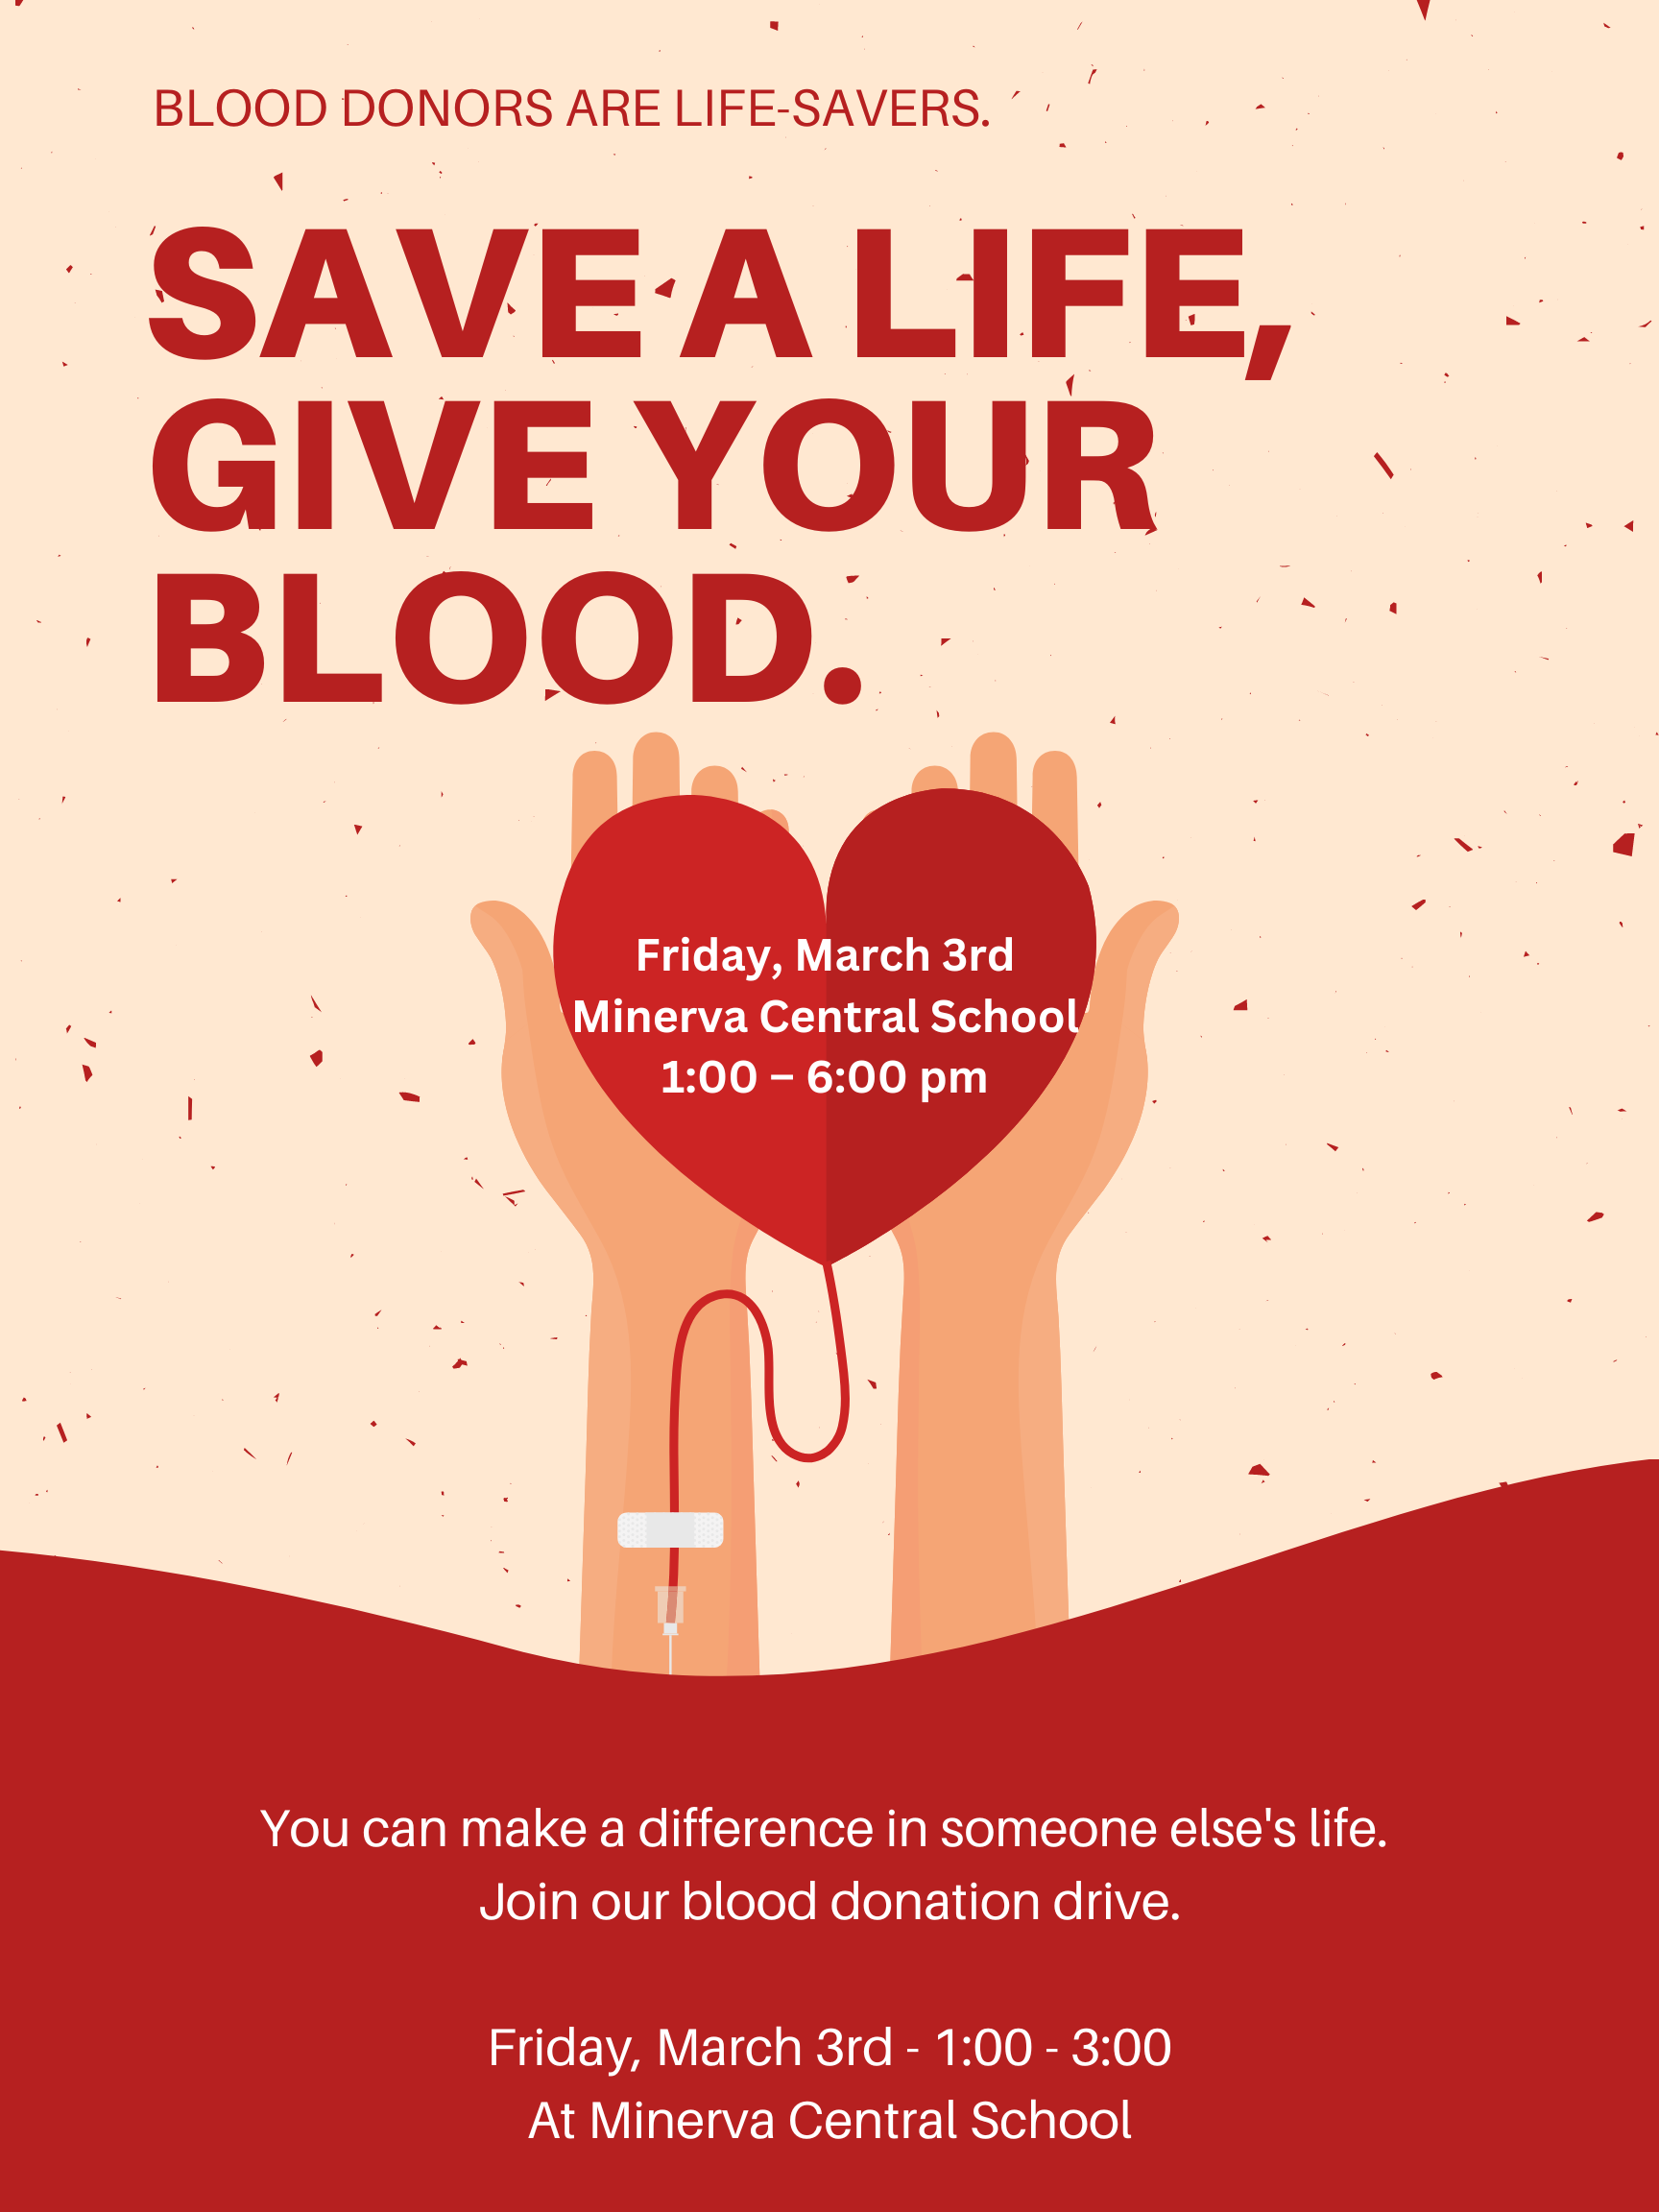 Blood Drive Image March 3, 2023 1:00 pm to 6:00 pm at Minerva Central School.